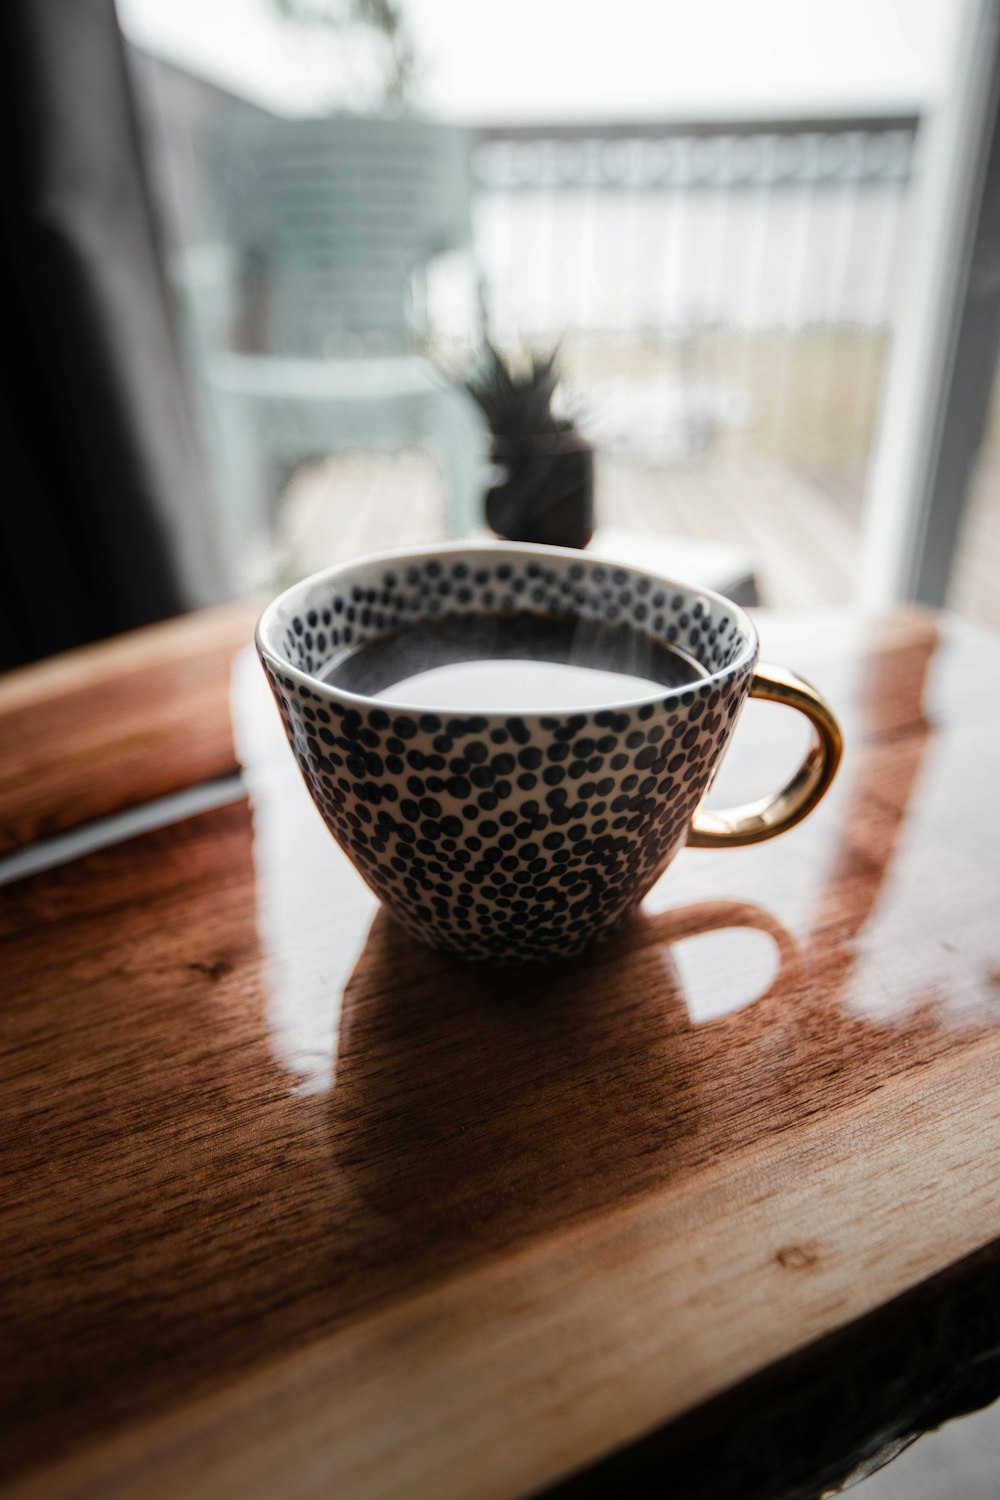 white and black ceramic teacup on brown wooden table